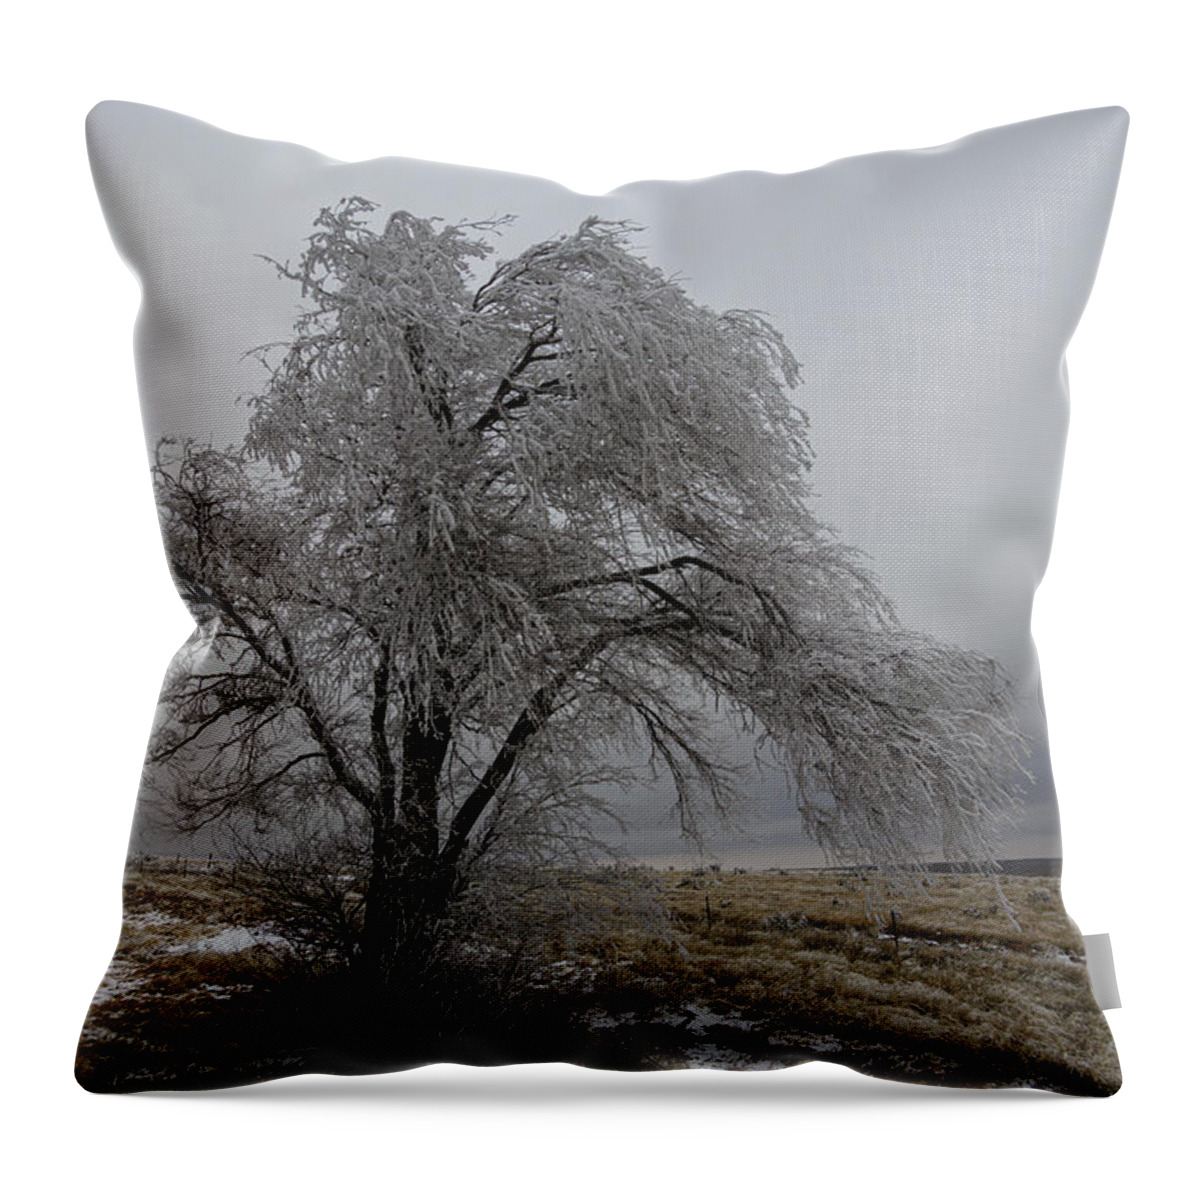 Frozen Throw Pillow featuring the photograph Frozen Tree by Steve Templeton